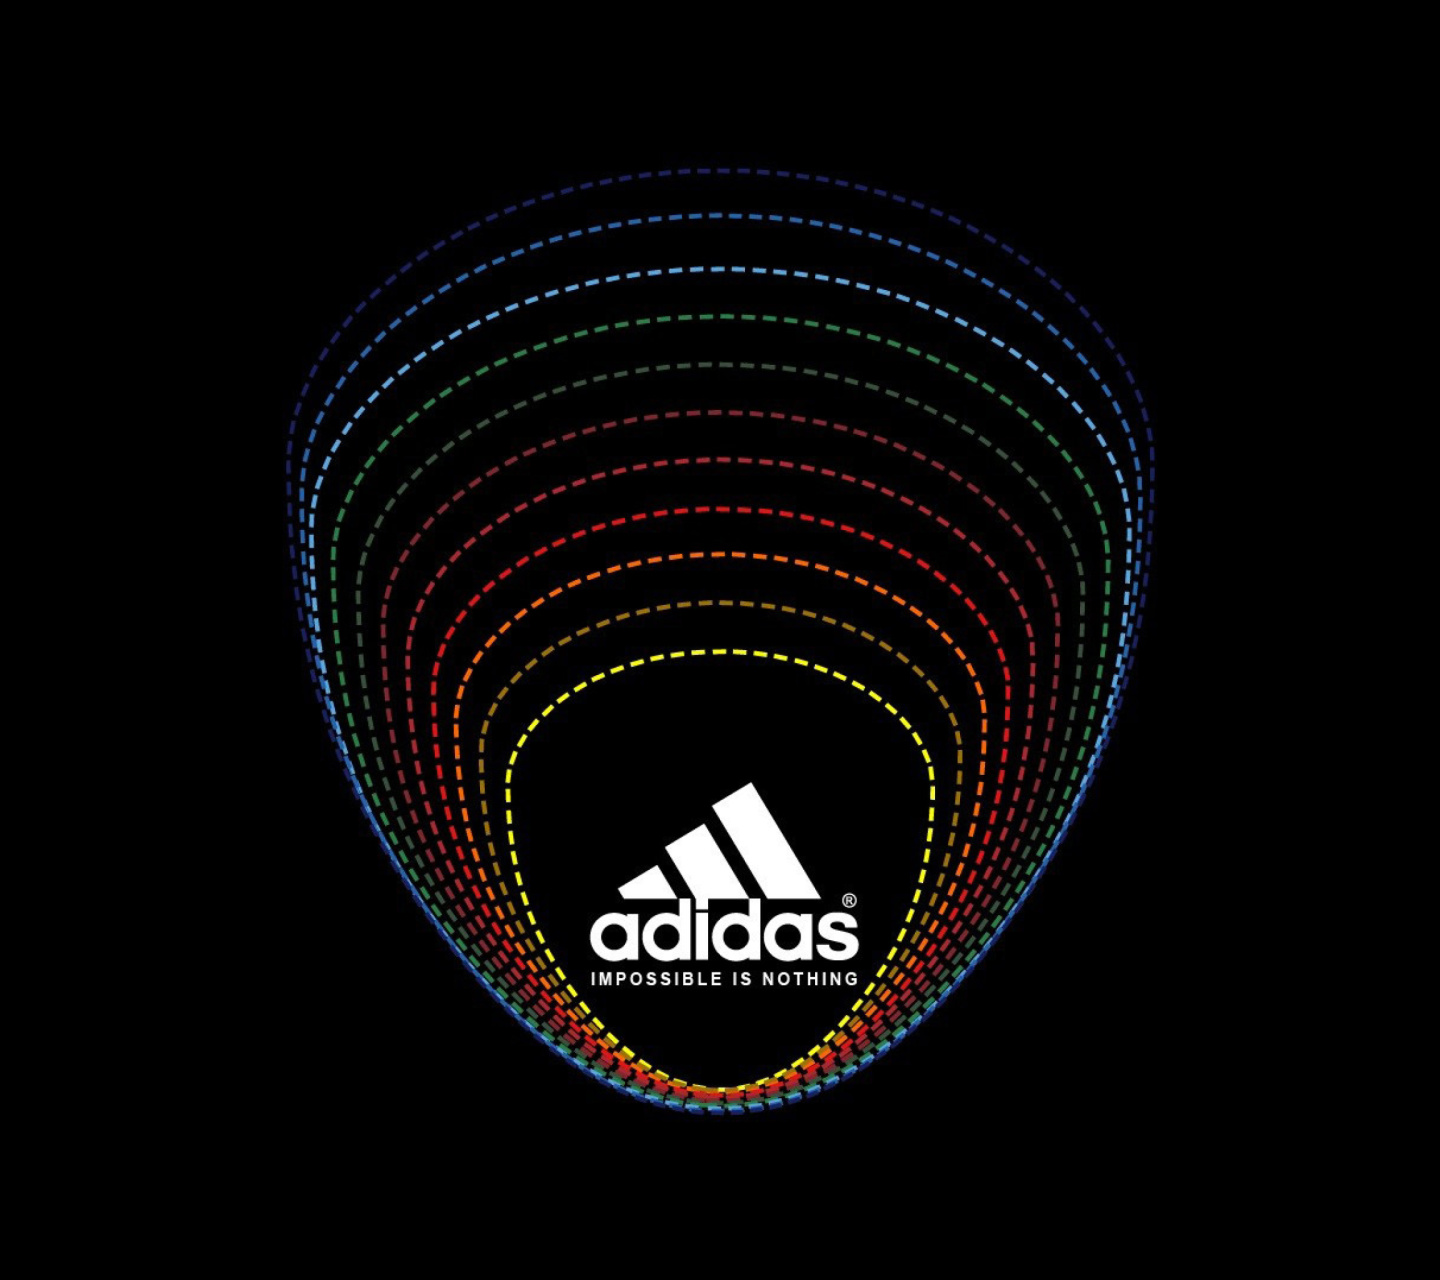 Das Adidas Tagline, Impossible is Nothing Wallpaper 1440x1280